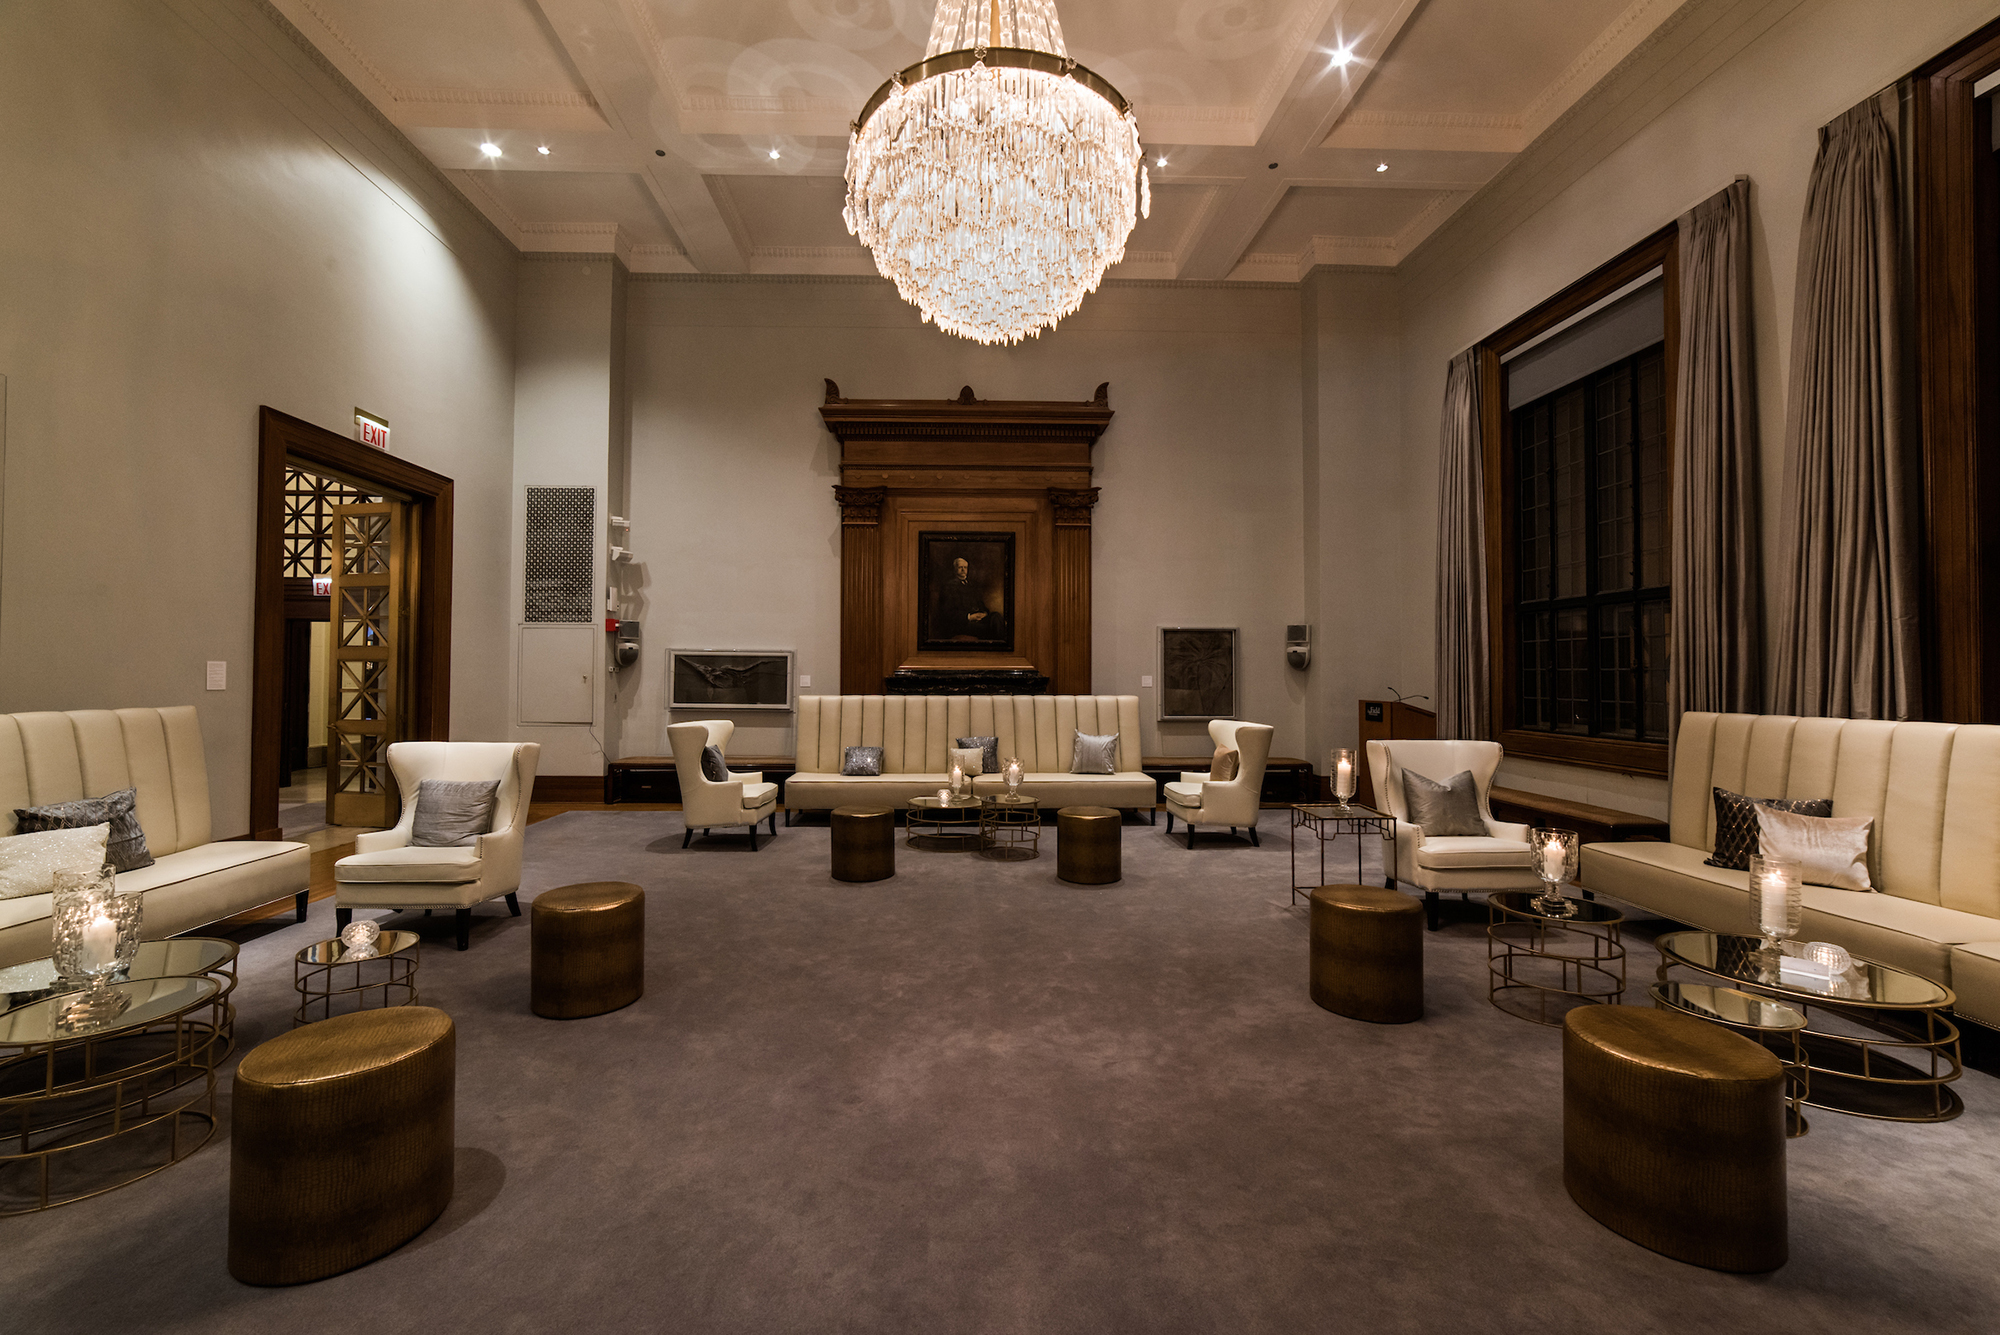 Founders' Room arranged for an event with a range of seating, including couches, chairs, and coffee tables.